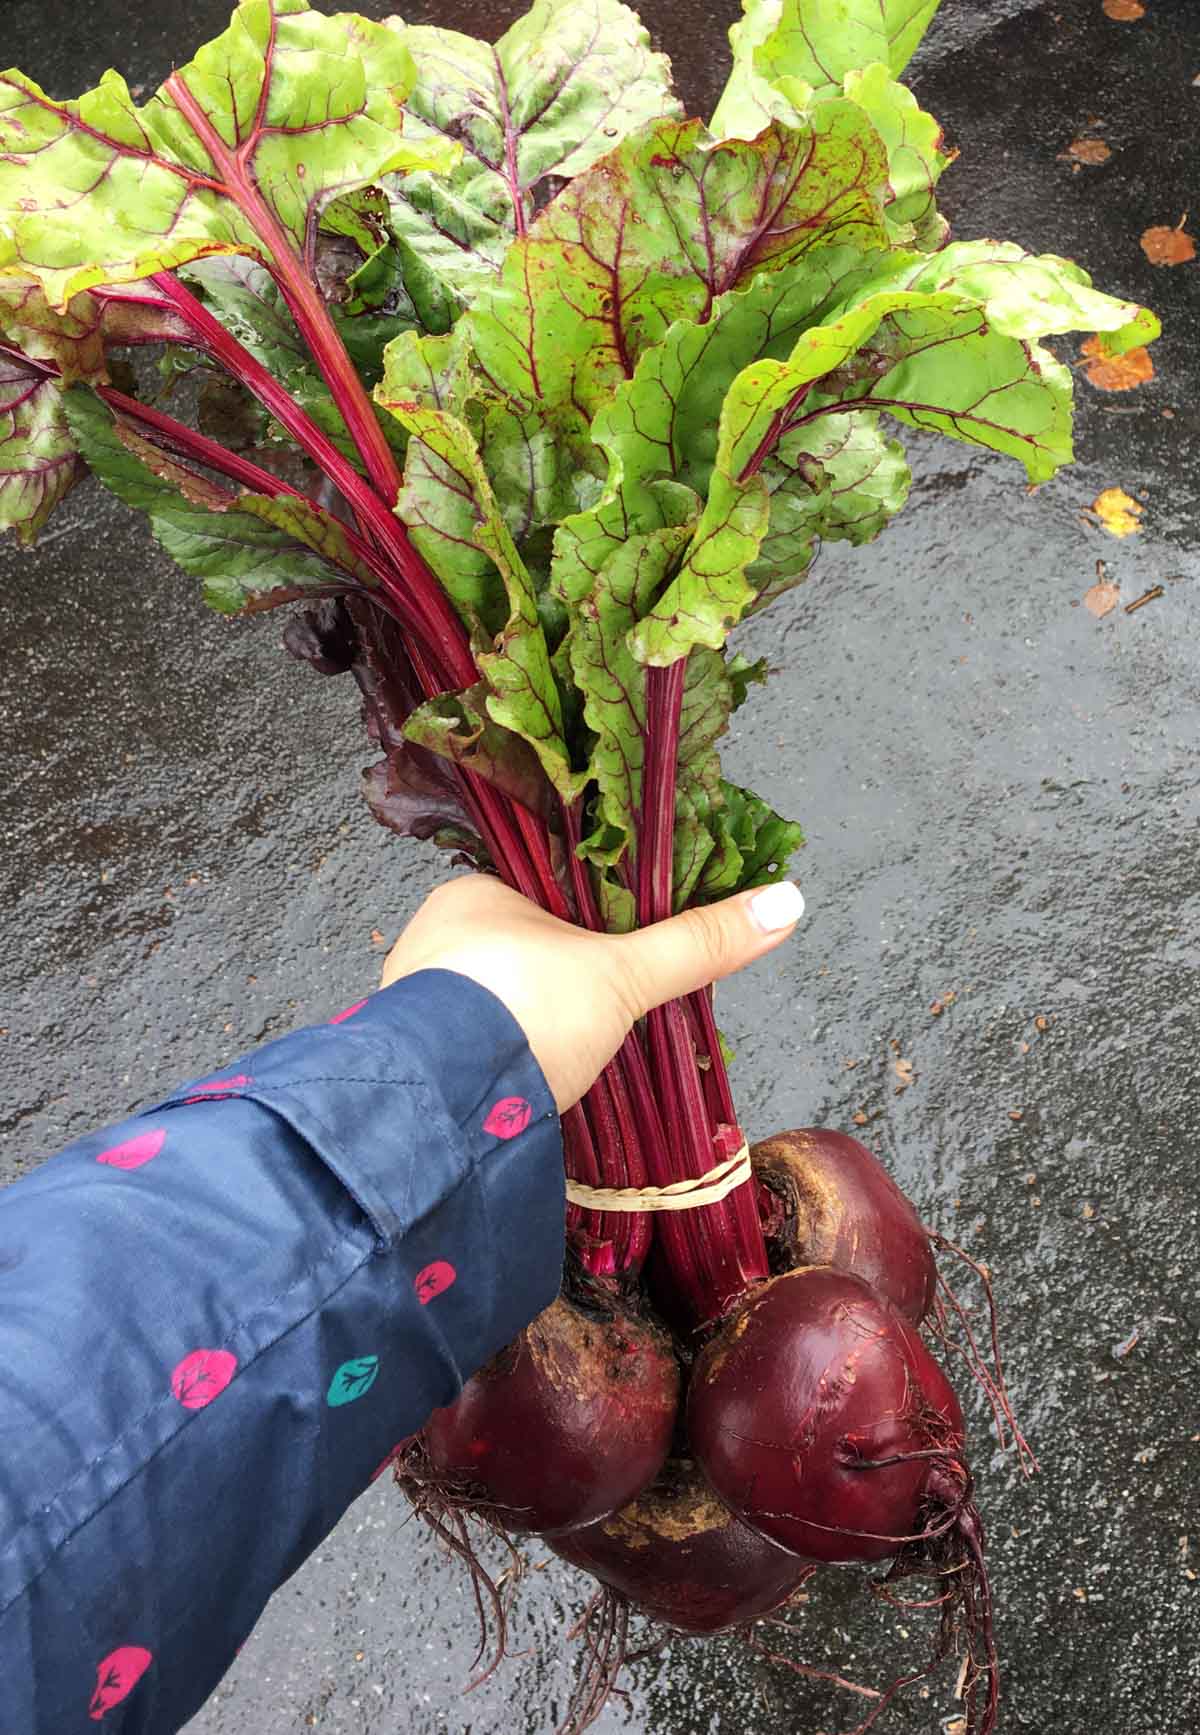 A bunch of fresh beetroots with green tops bought at a farmer's market